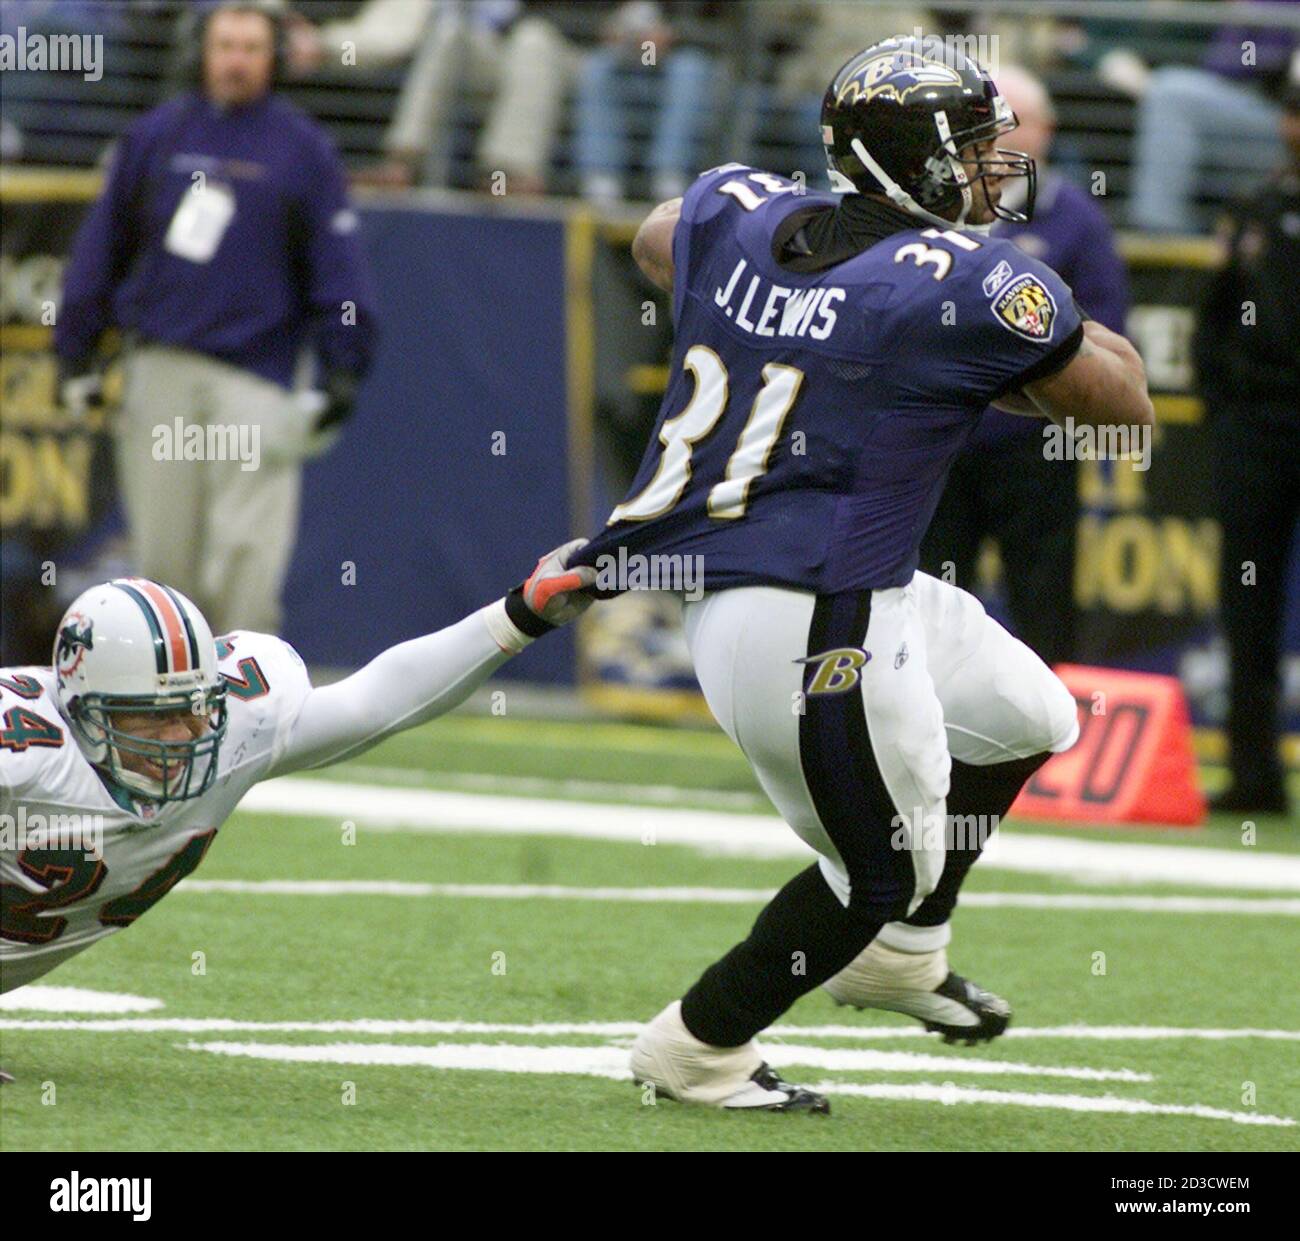 Baltimore Ravens' running back Jamal Lewis (R) picks up a first down as  Miami Dolphins' safety Sammy Knight tries to pull him down by his jersey,  during the second quarter of their